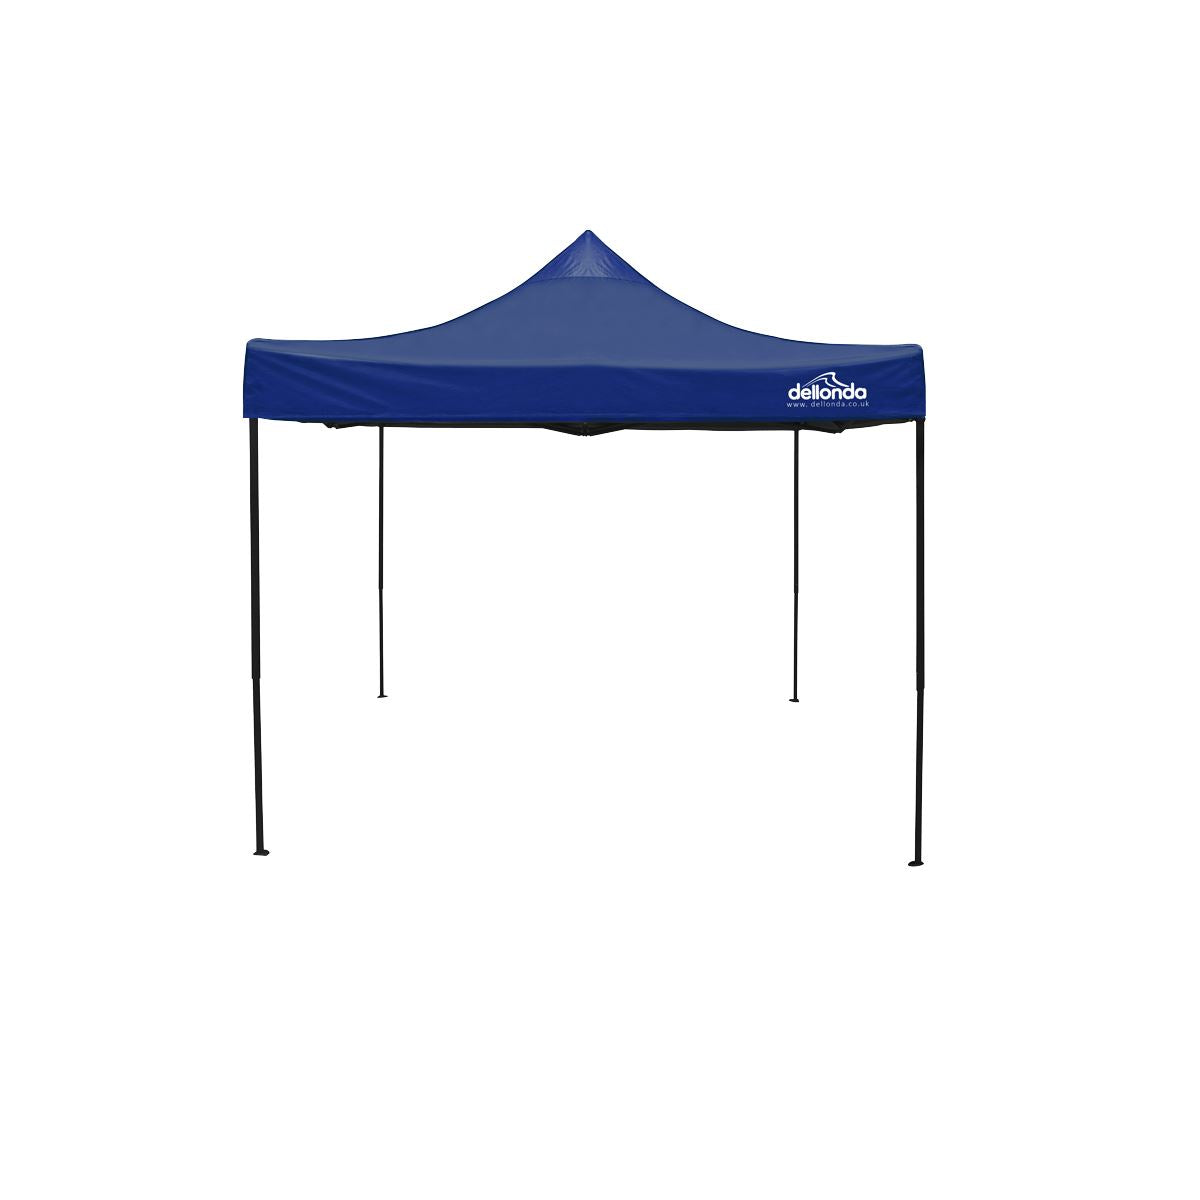 Dellonda Premium 3 x 3m Pop-Up Gazebo, PVC Coated, Water Resistant Fabric, Supplied with Carry Bag, Rope, Stakes & Weight Bags - Blue Canopy